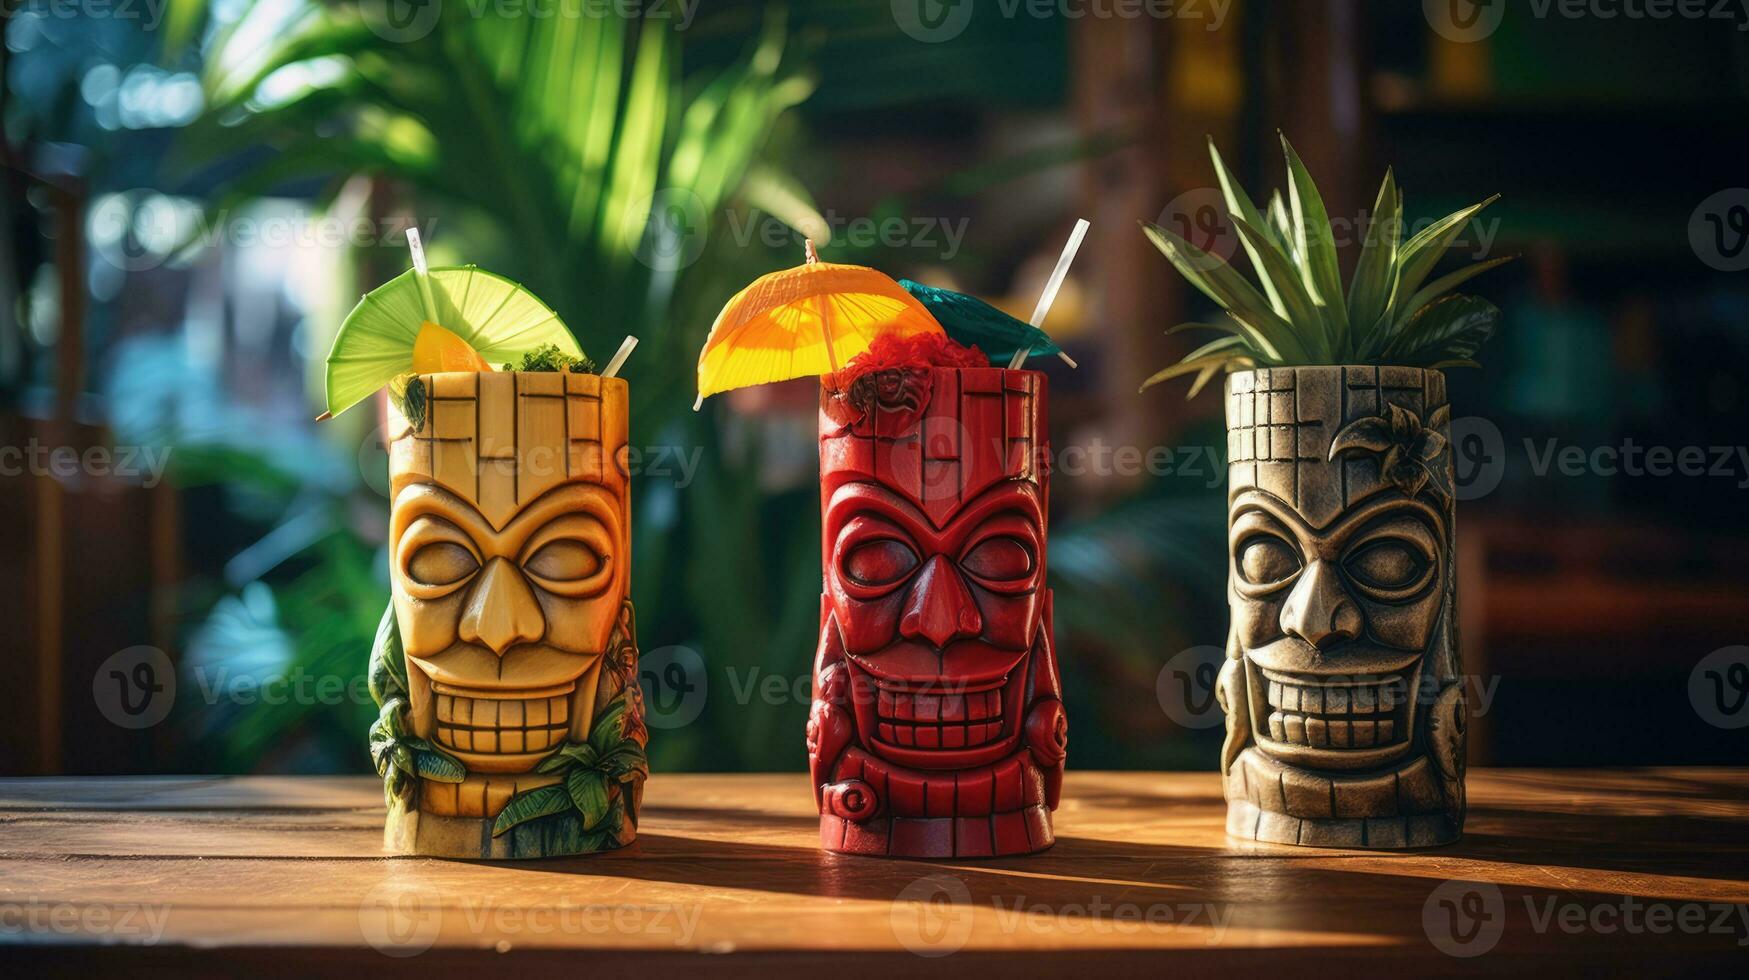 Summer refreshing tiki cocktails on the background of a bar counter photo